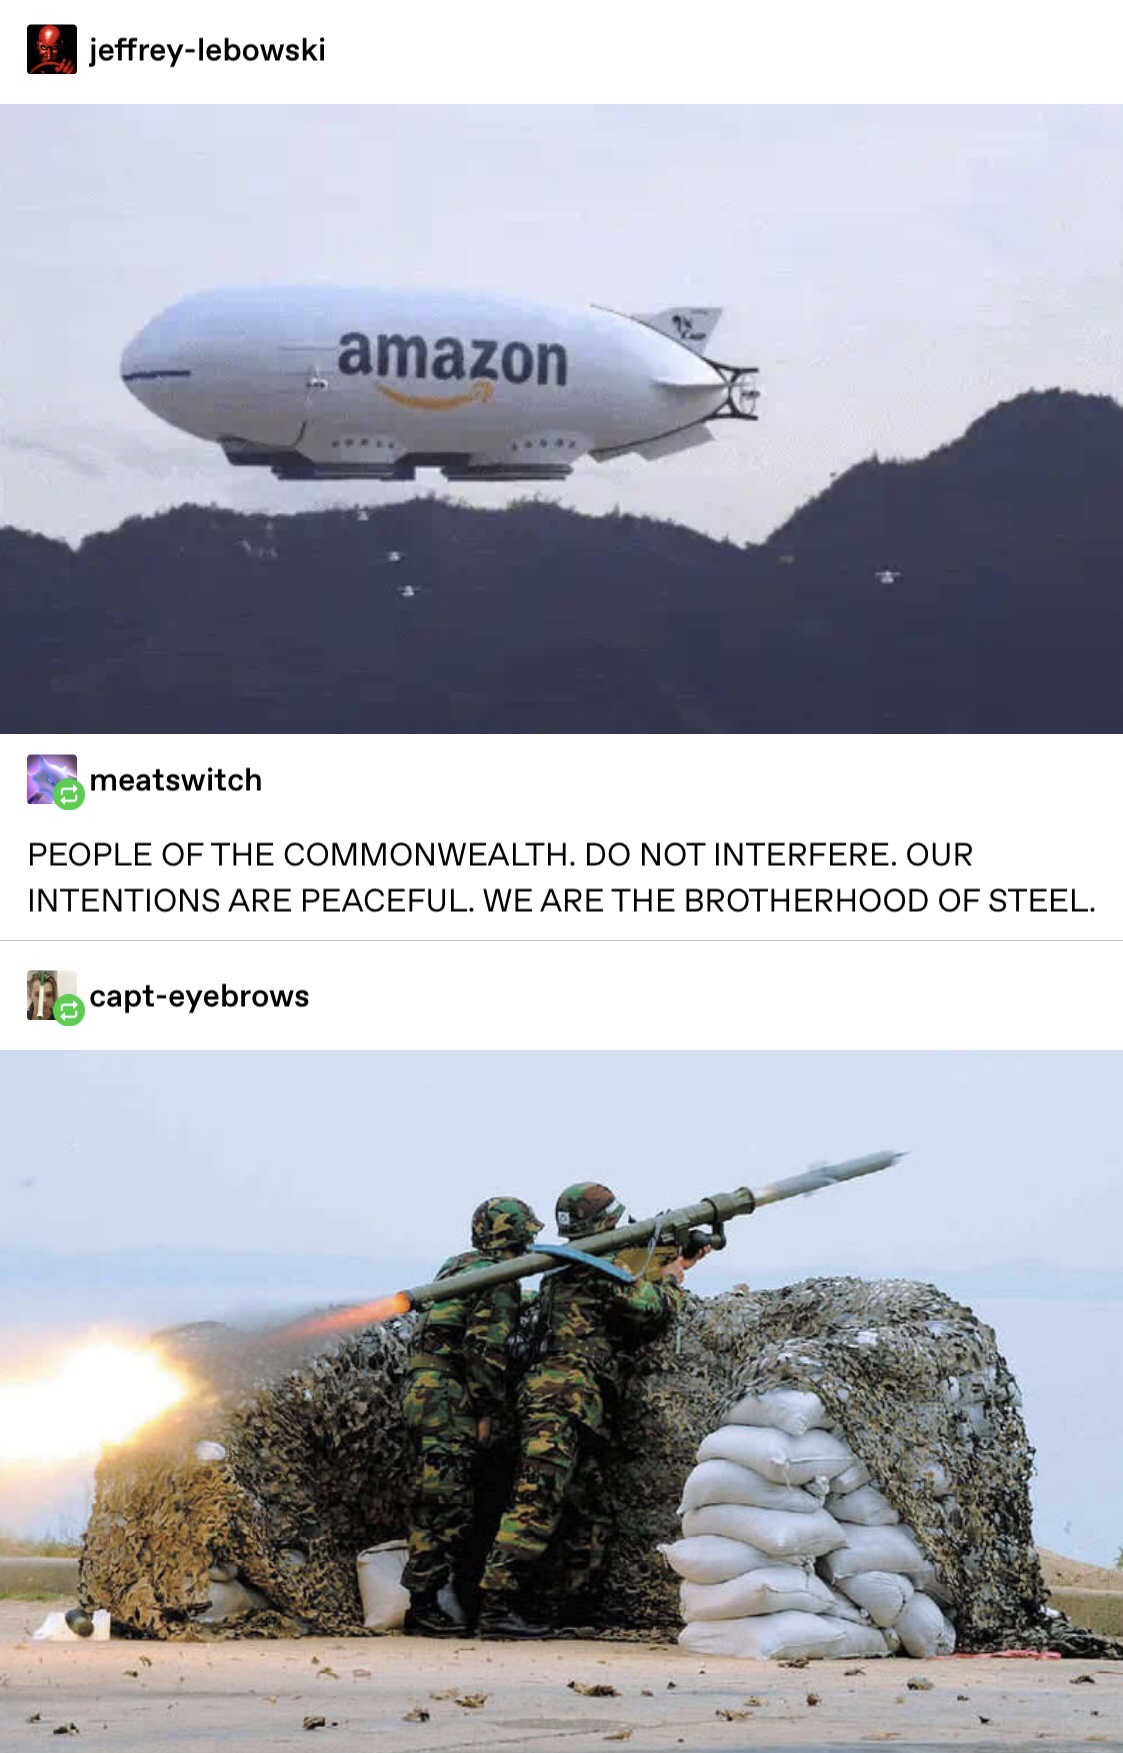 igla s missile - jeffreylebowski amazon Lo meatswitch People Of The Commonwealth. Do Not Interfere. Our Intentions Are Peaceful. We Are The Brotherhood Of Steel. 1 capteyebrows